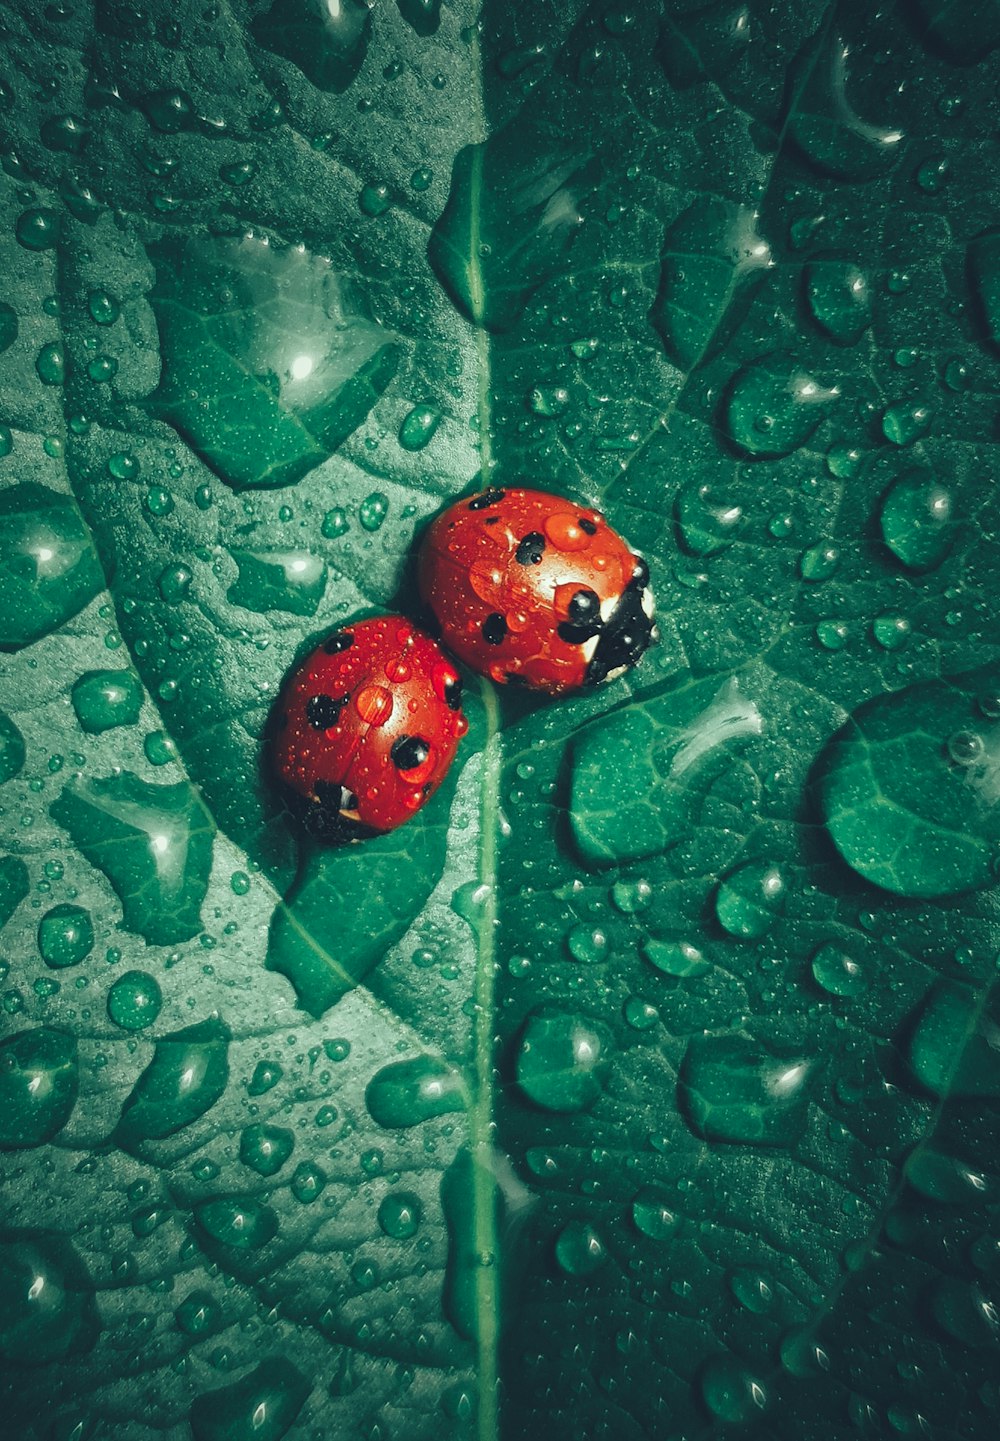 two ladybugs sitting on a green leaf with water droplets